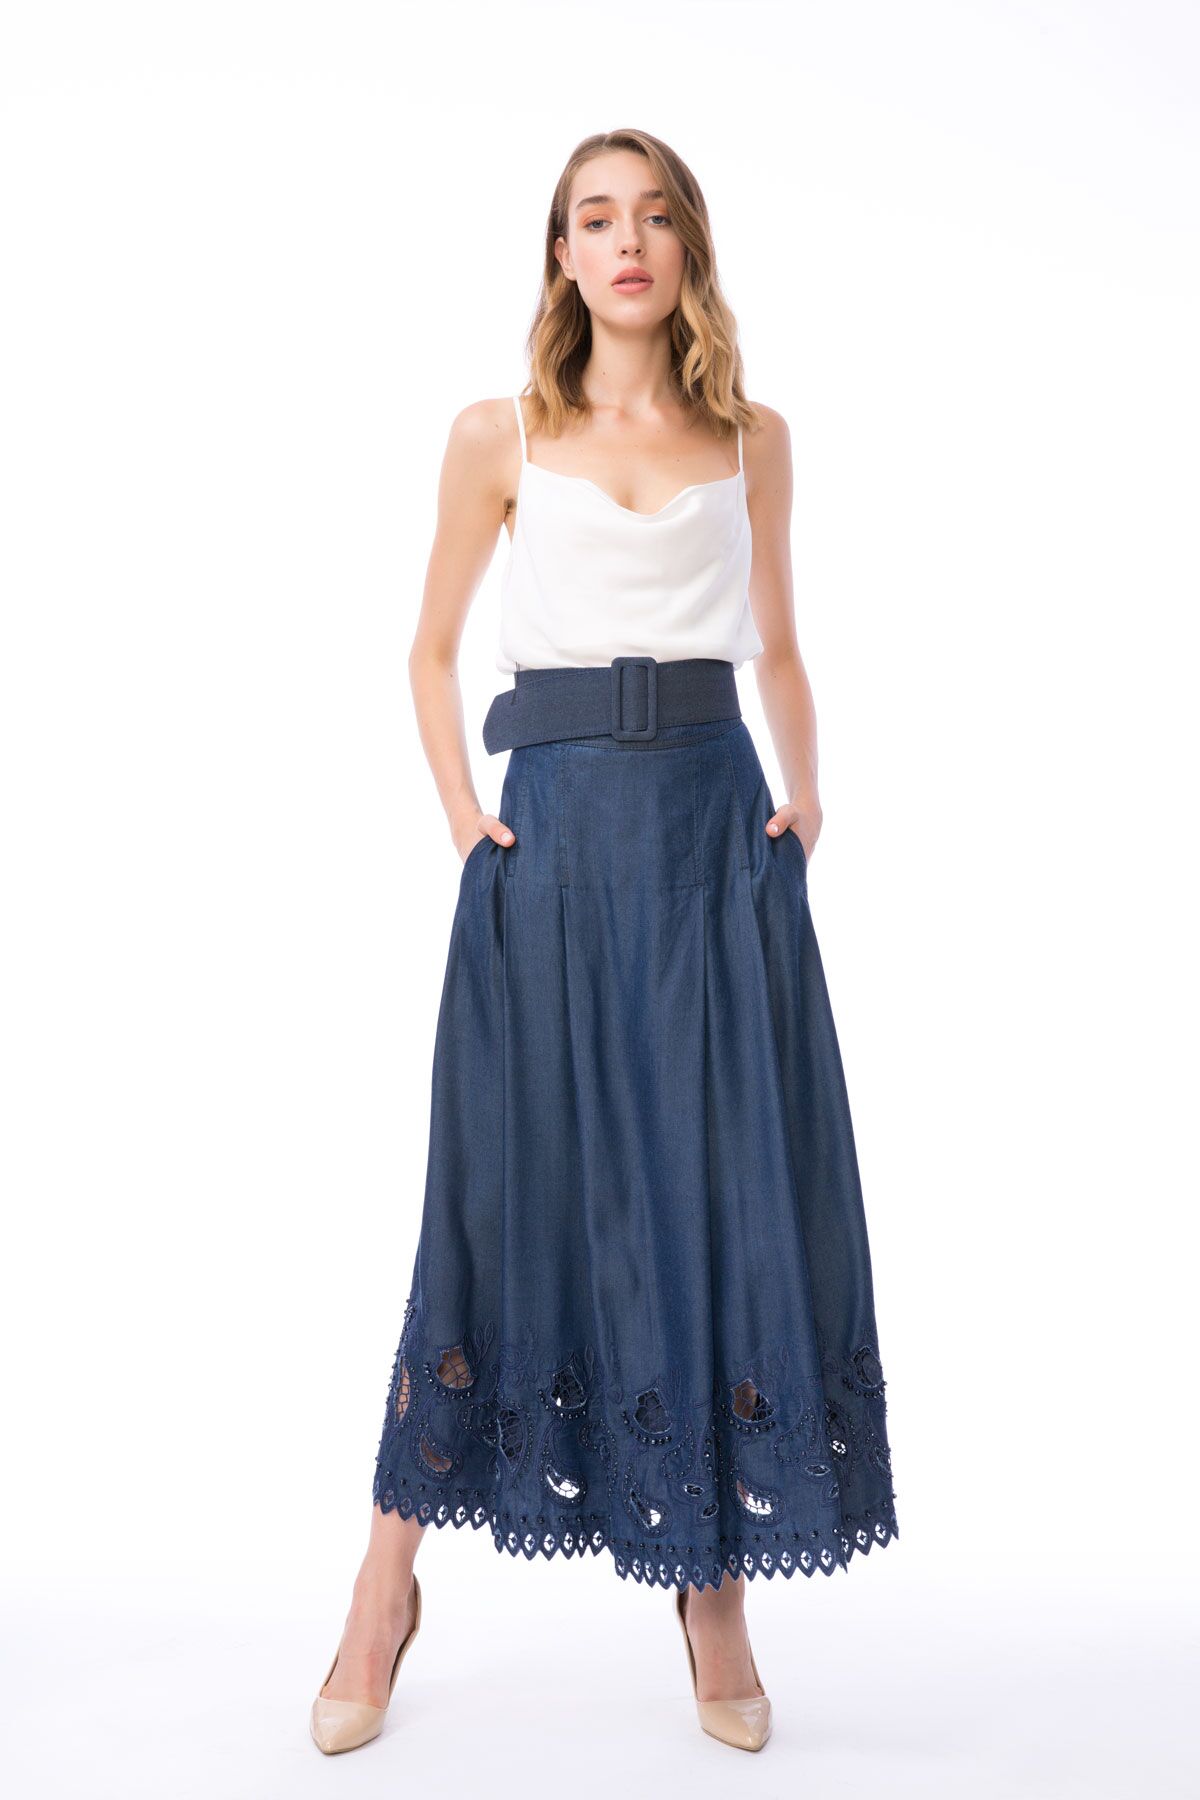 GIZIA - Belted High Waist Embroidered Long Blue Skirt